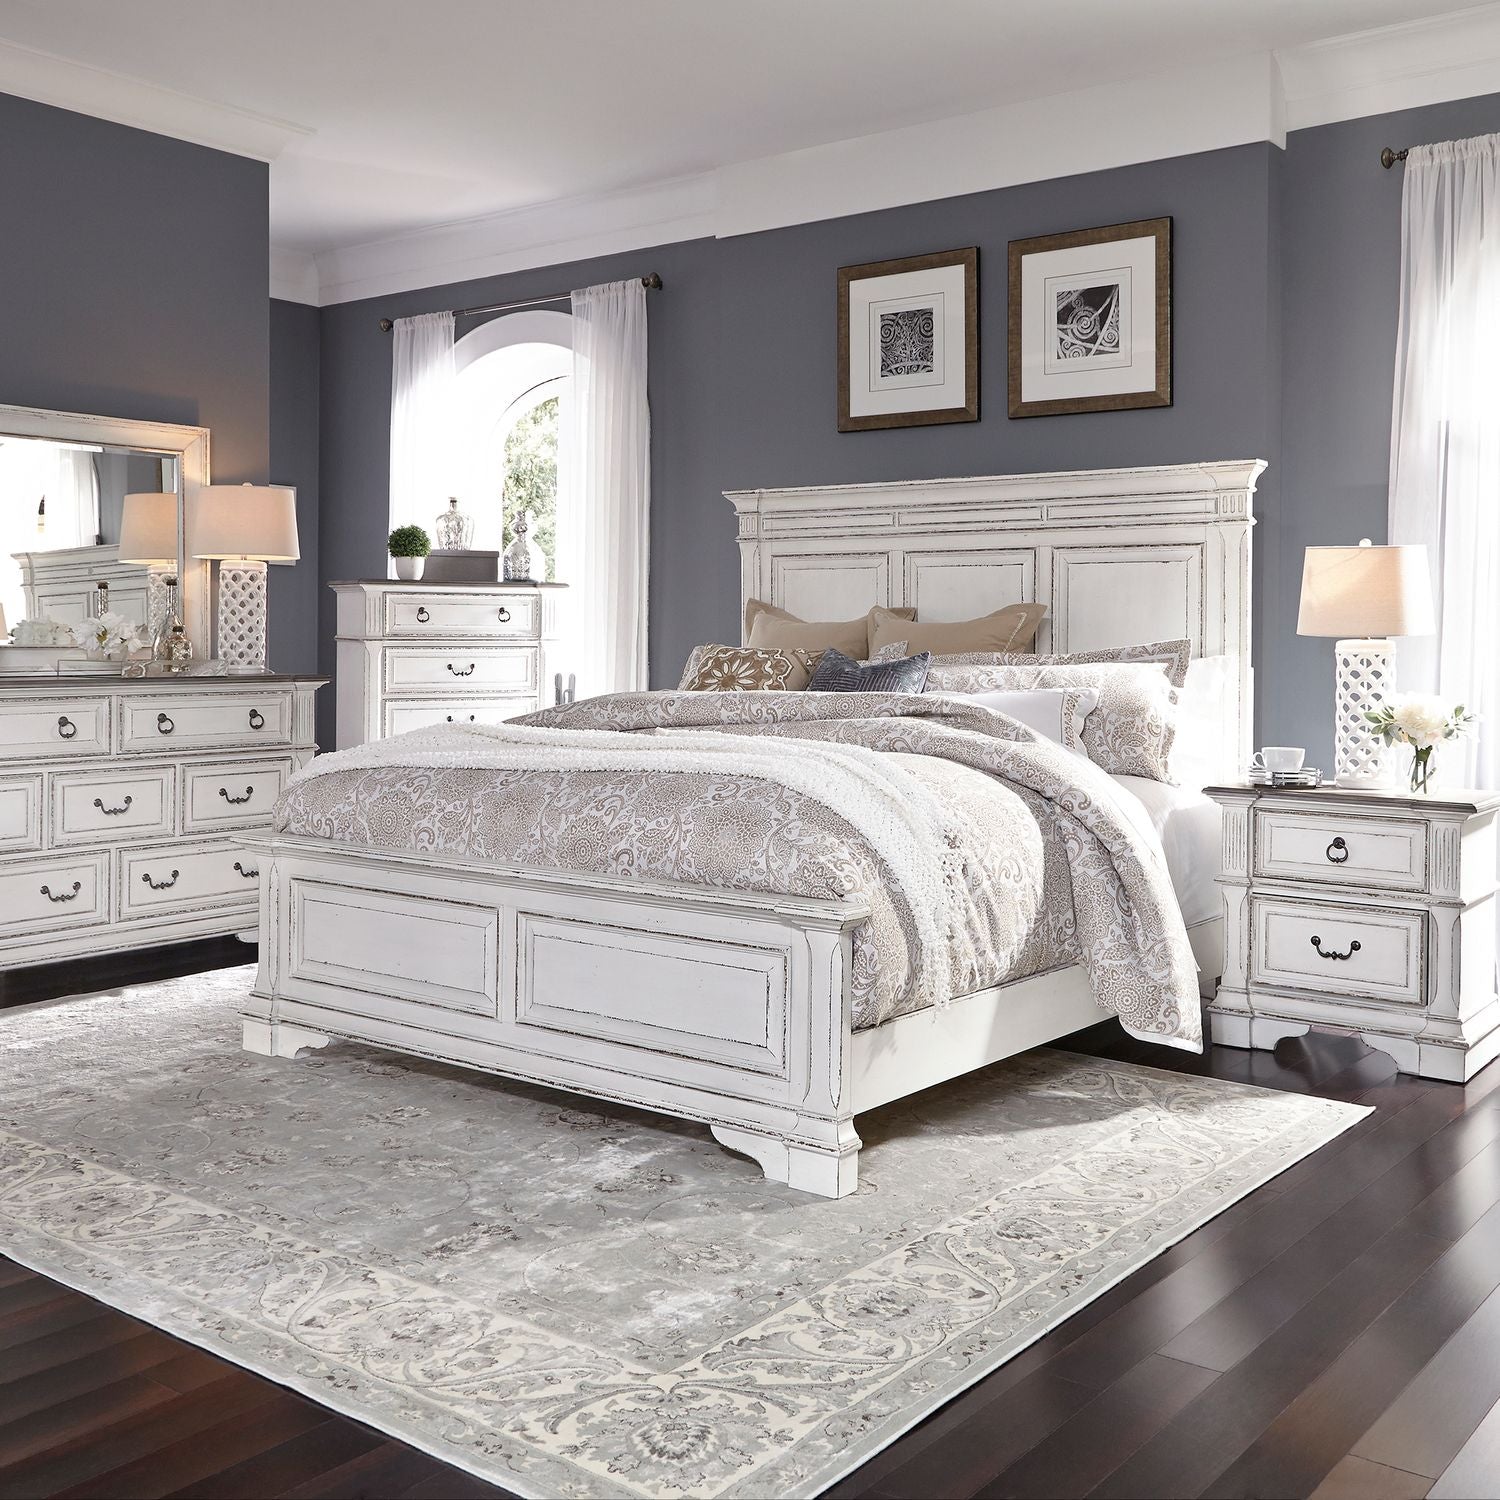 Abbey Park 520-BR Panel Bedroom Collection from Liberty Furniture